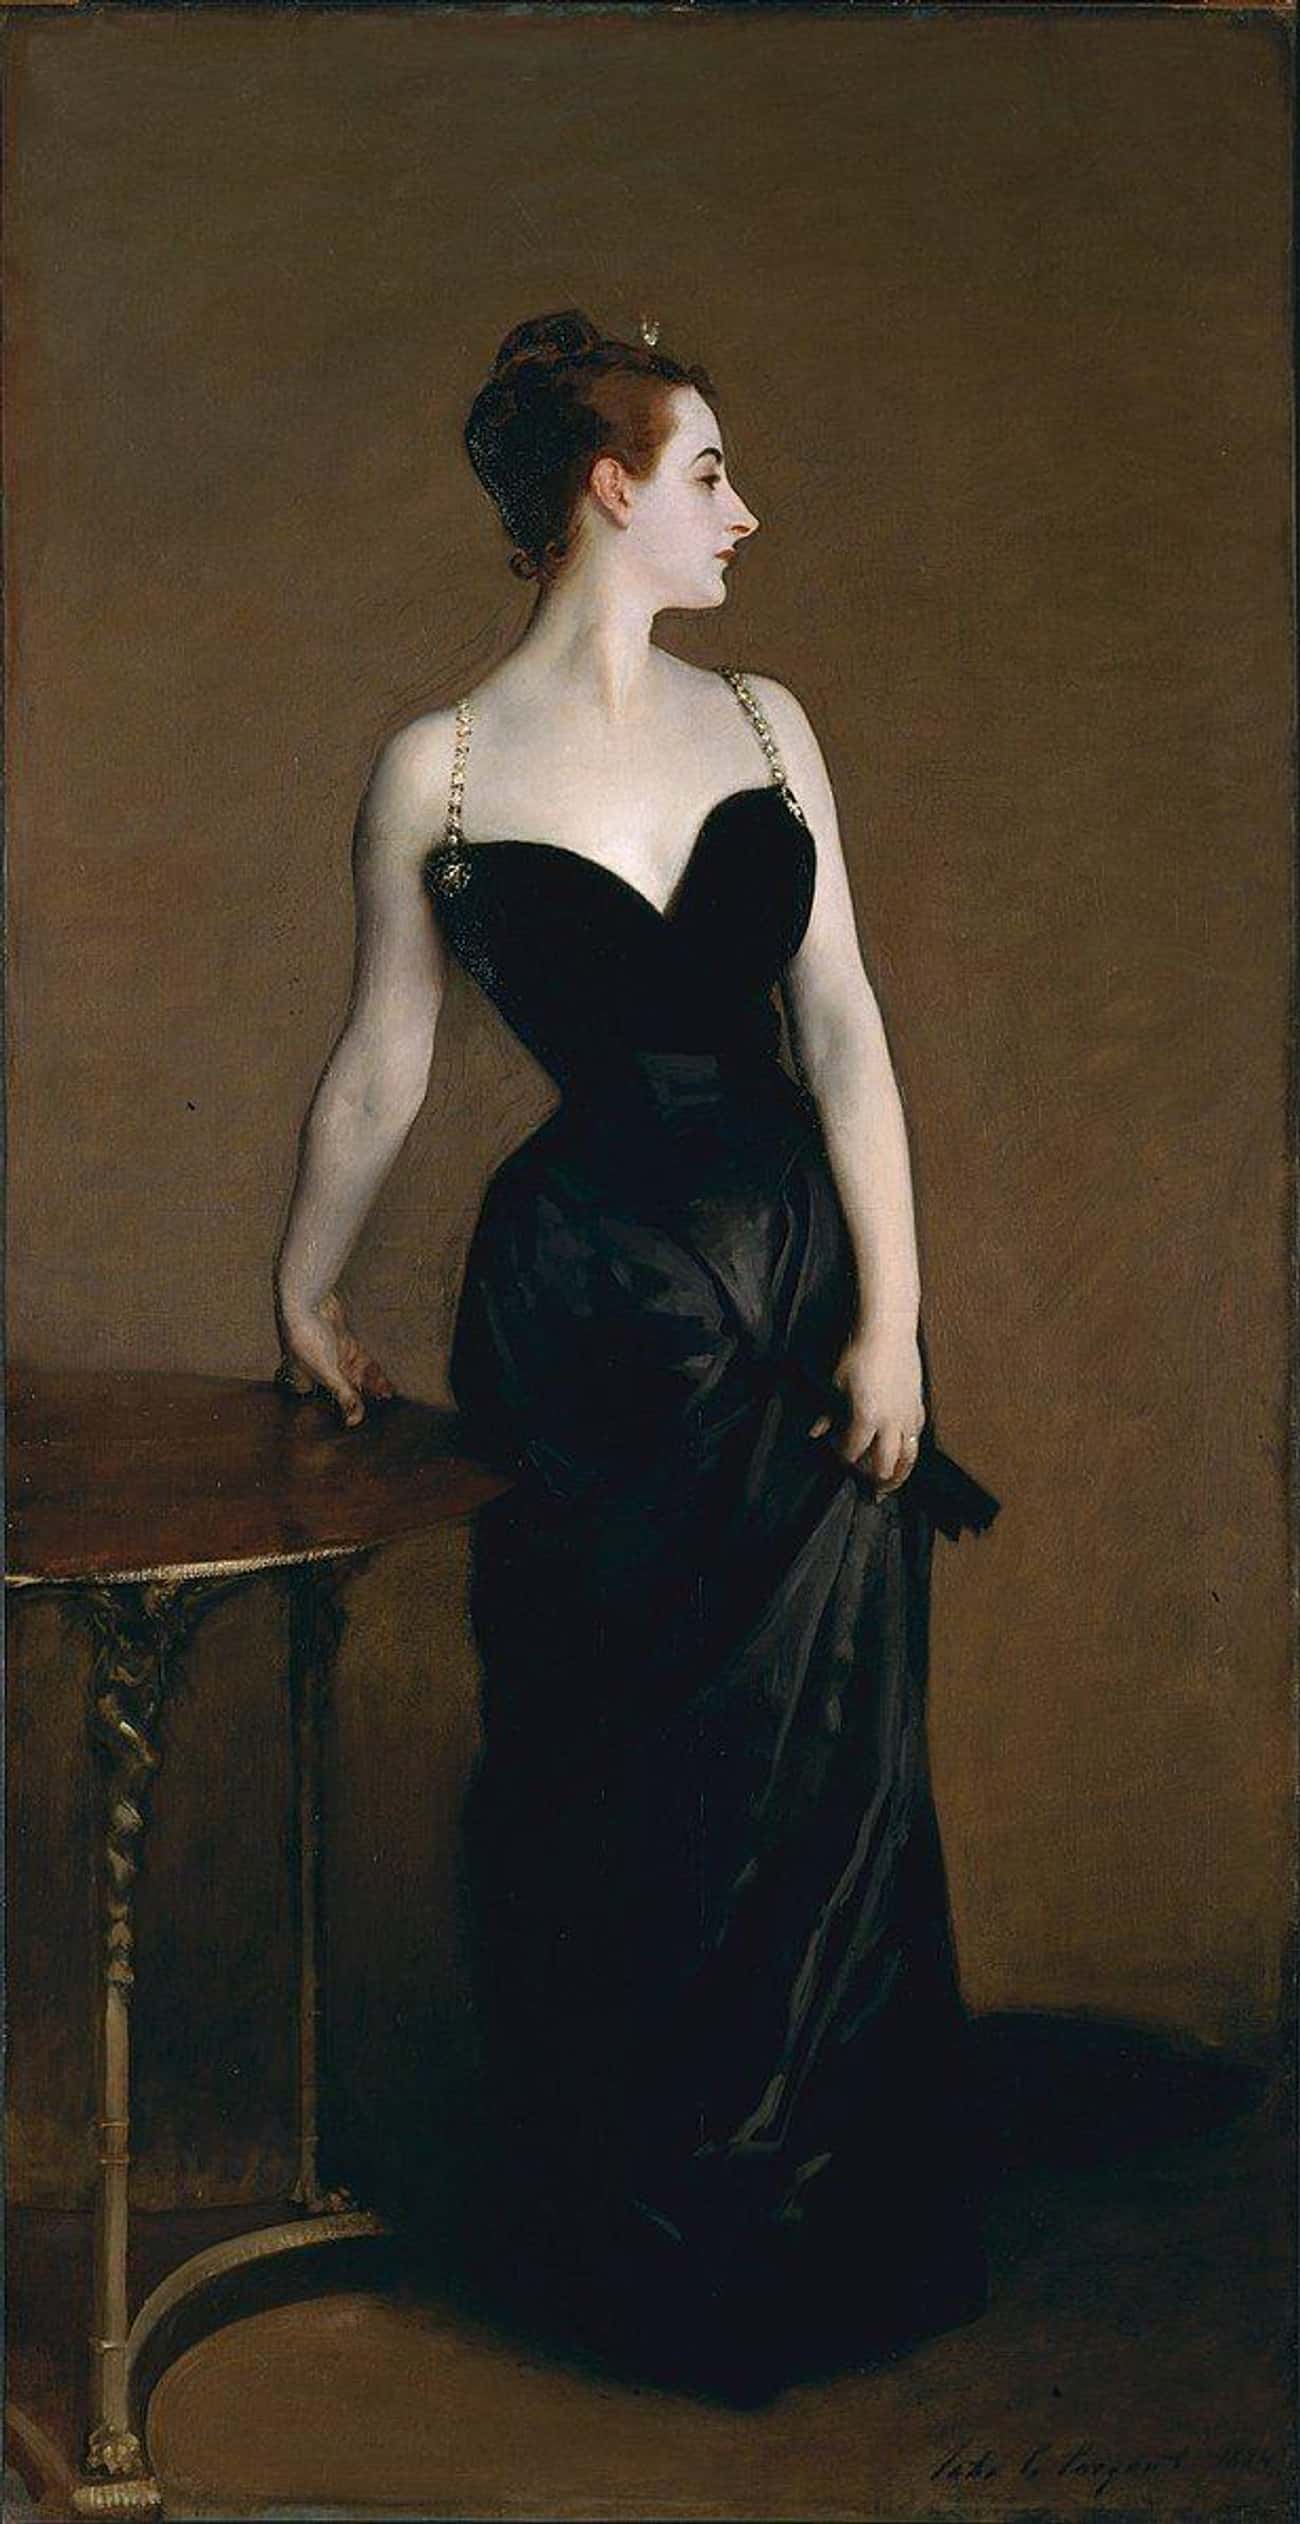 John Singer Sargent's Portrait Of Virginie Gautreau, 'Madame X,' Caused A Scandal And Resulted In The Artist Leaving Paris Forever